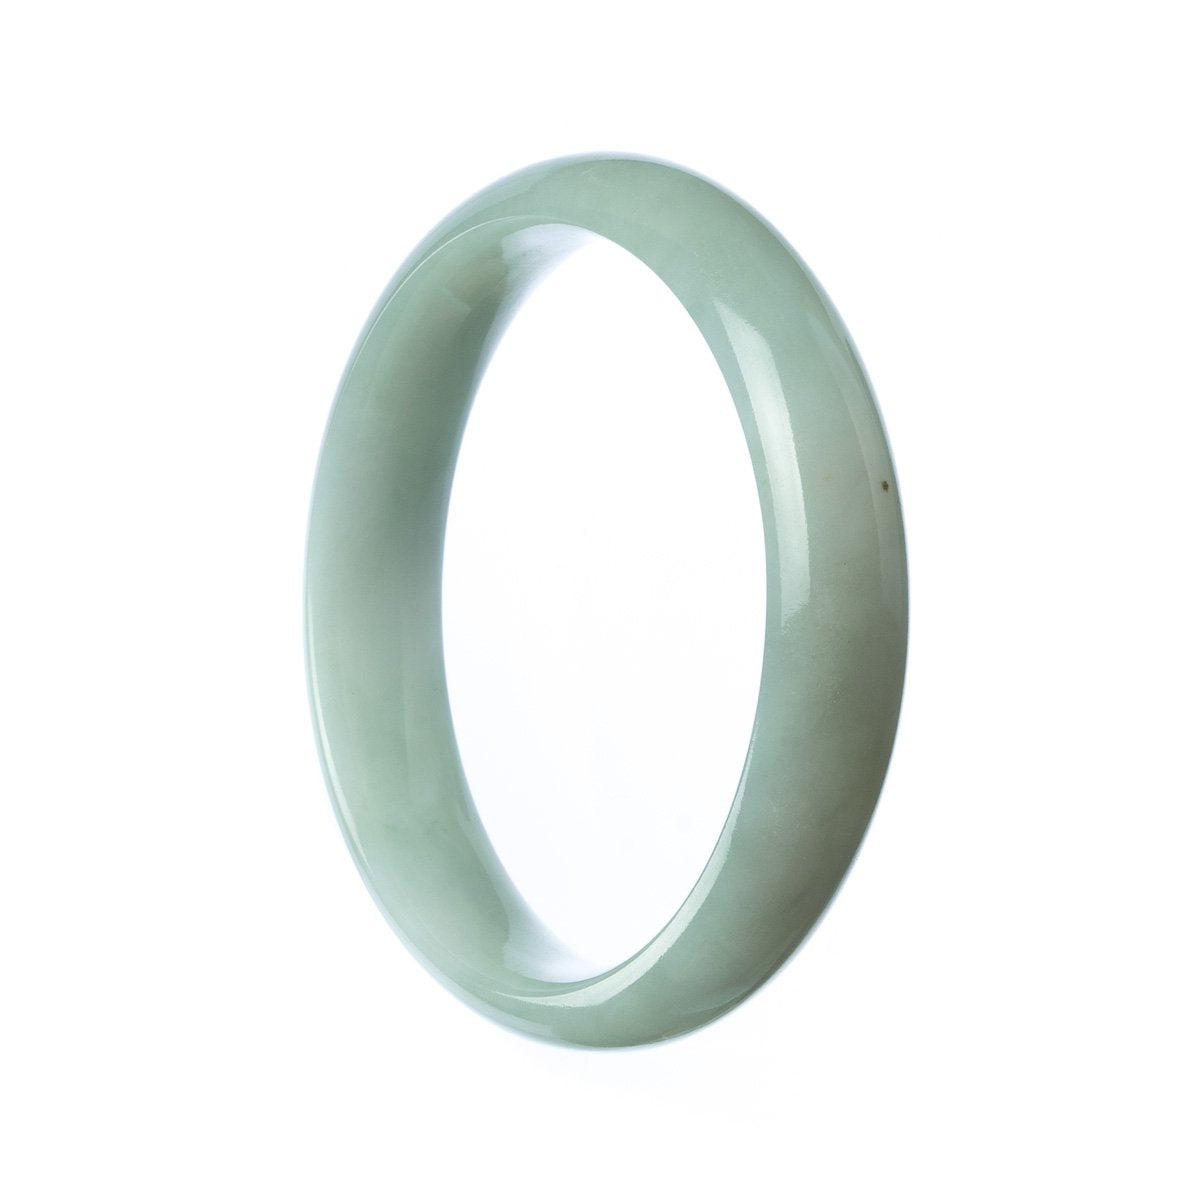 A half-moon shaped pale green jade bangle, made of genuine Grade A jade, with a diameter of 57mm.